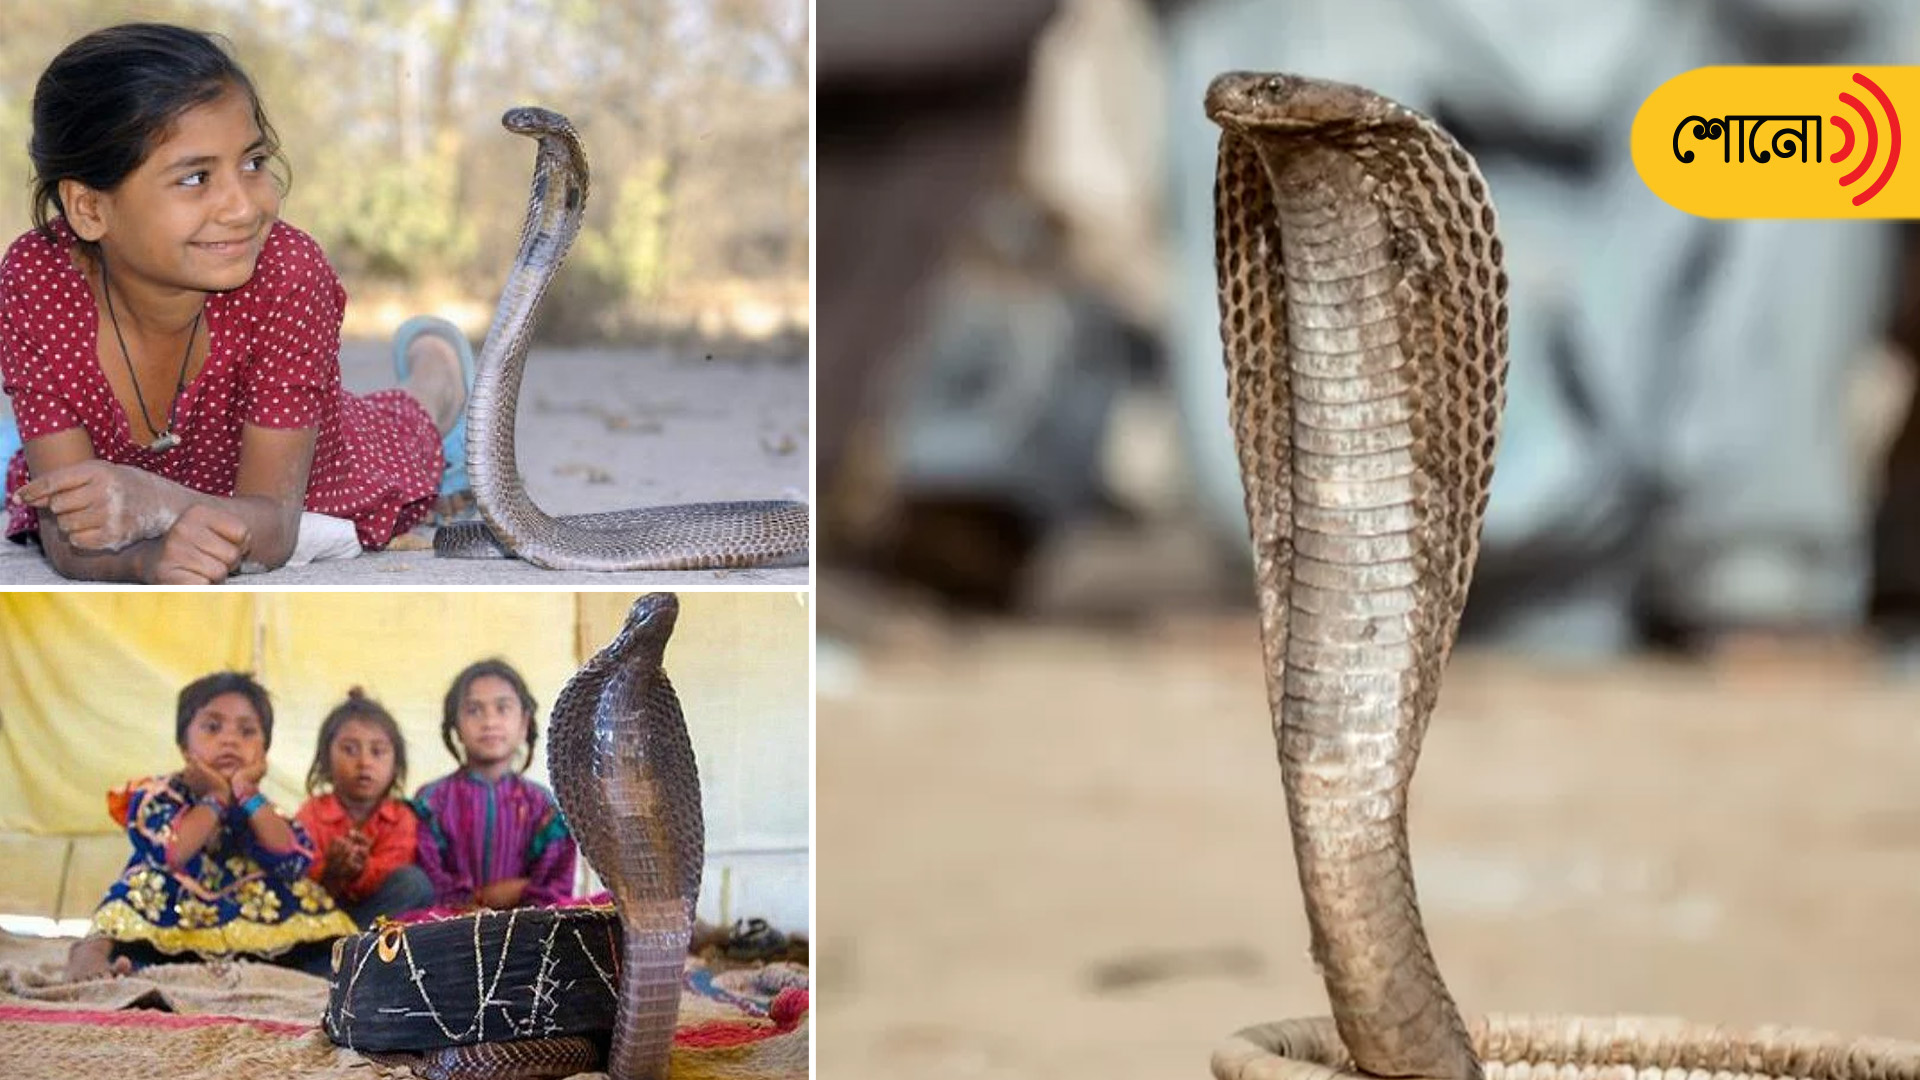 A place where cobras and humans live together as a family